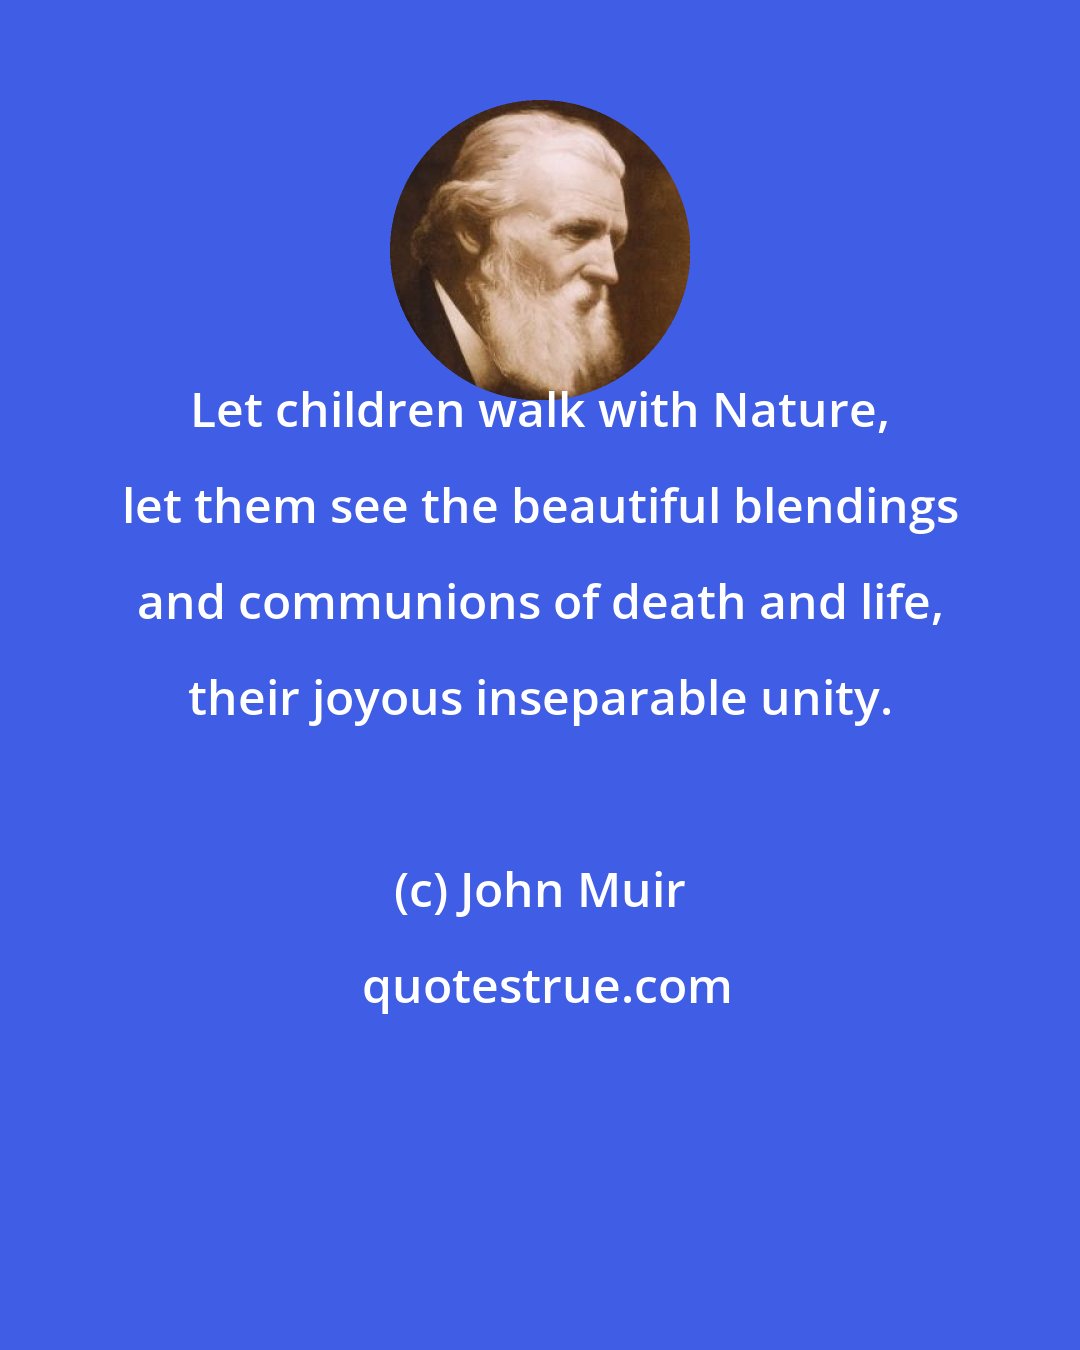 John Muir: Let children walk with Nature, let them see the beautiful blendings and communions of death and life, their joyous inseparable unity.